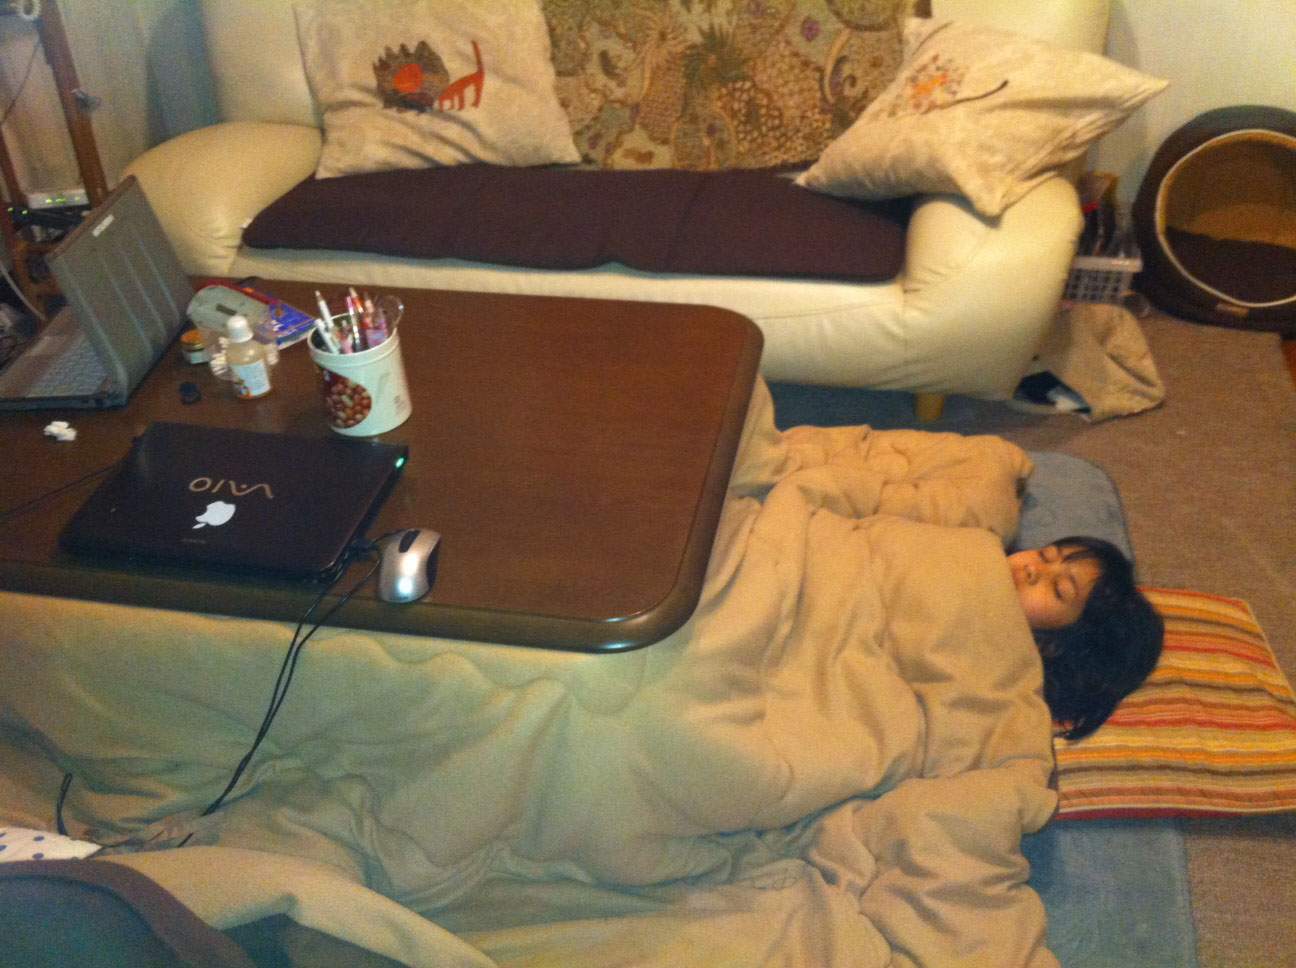 Never Leave Your Bed Again With This Awesome Japanese Invention